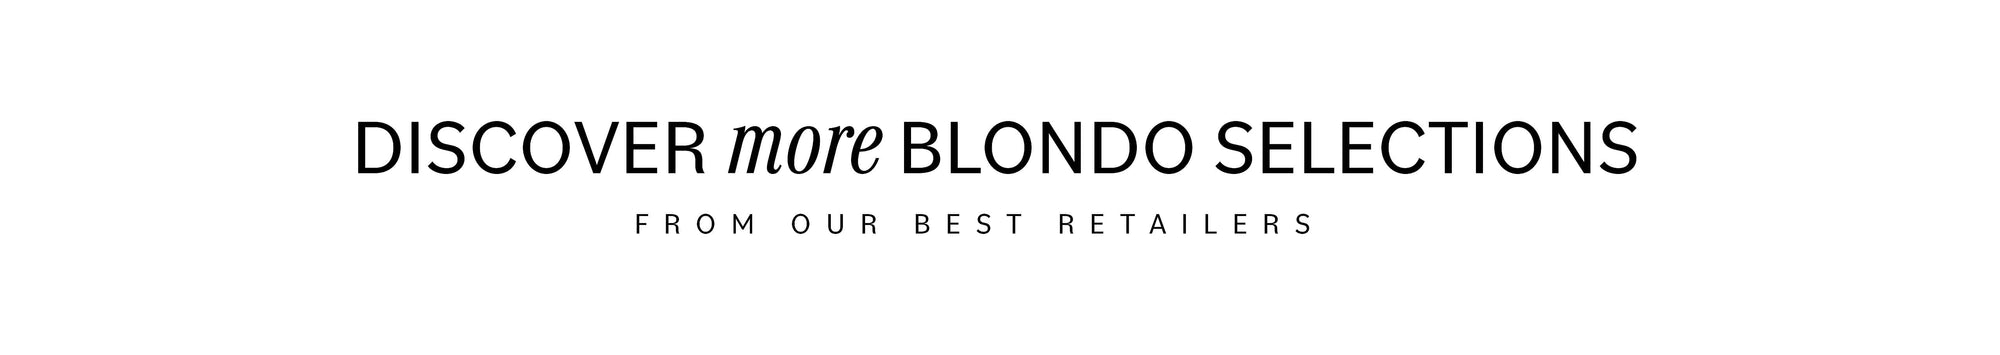 DISCOVER MORE BLONDO SELECTIONS